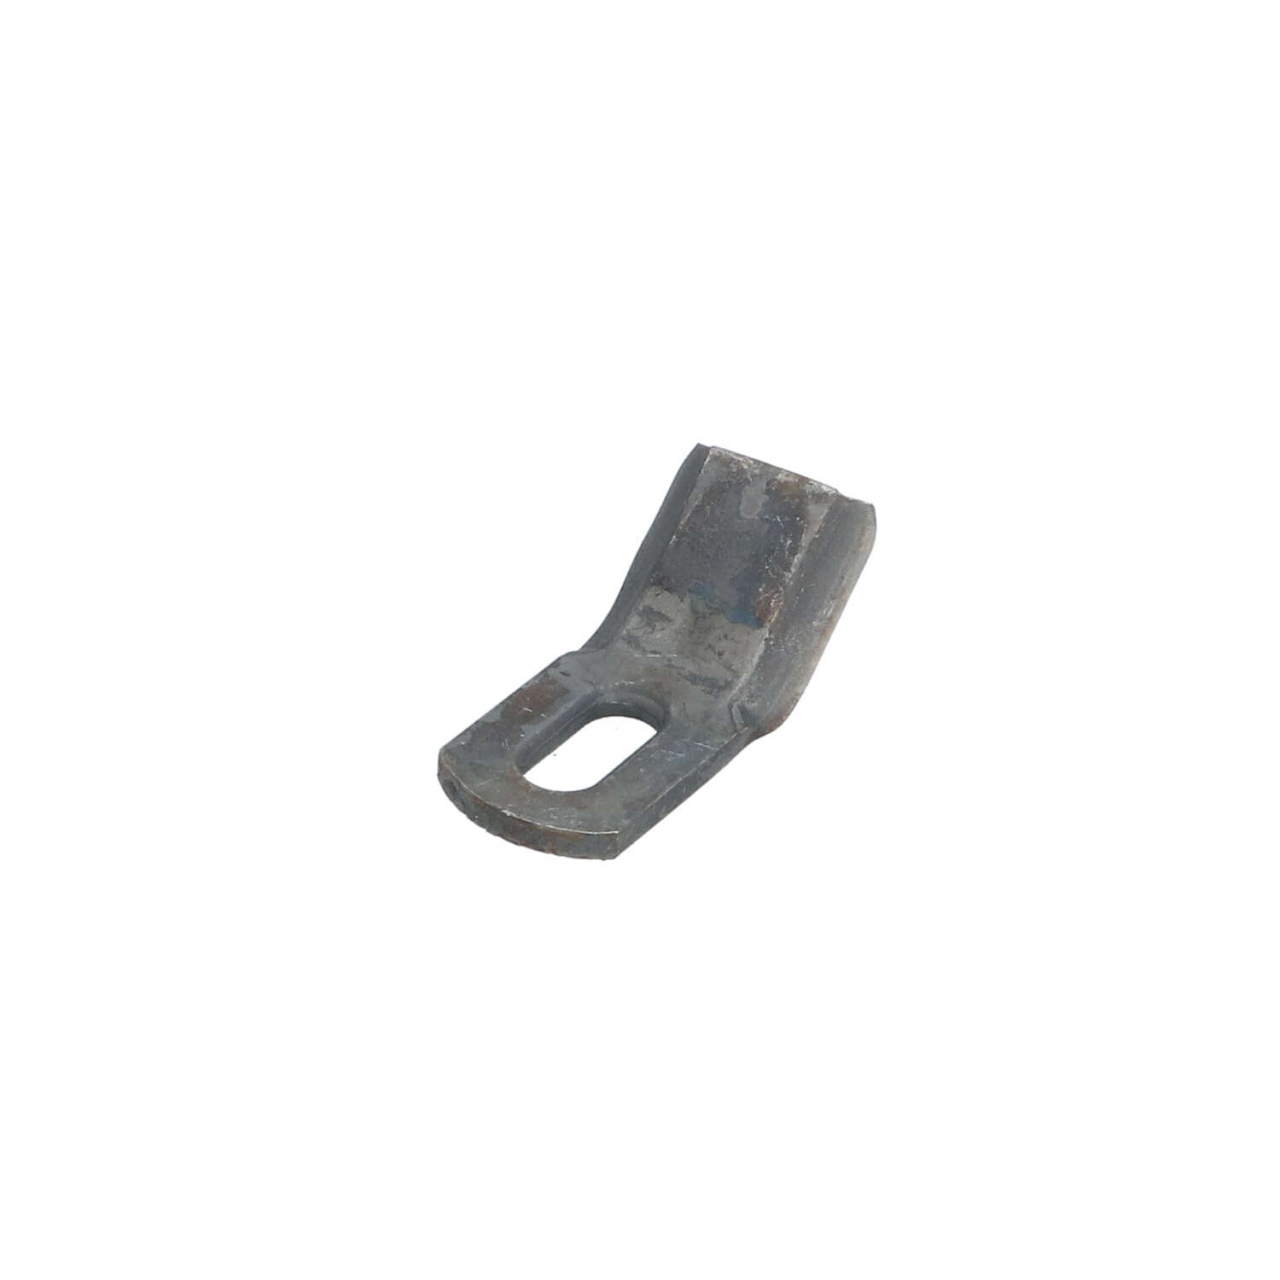 RDM Parts All-purpose Y-blade fitting for Carroy et Giraudon 16039